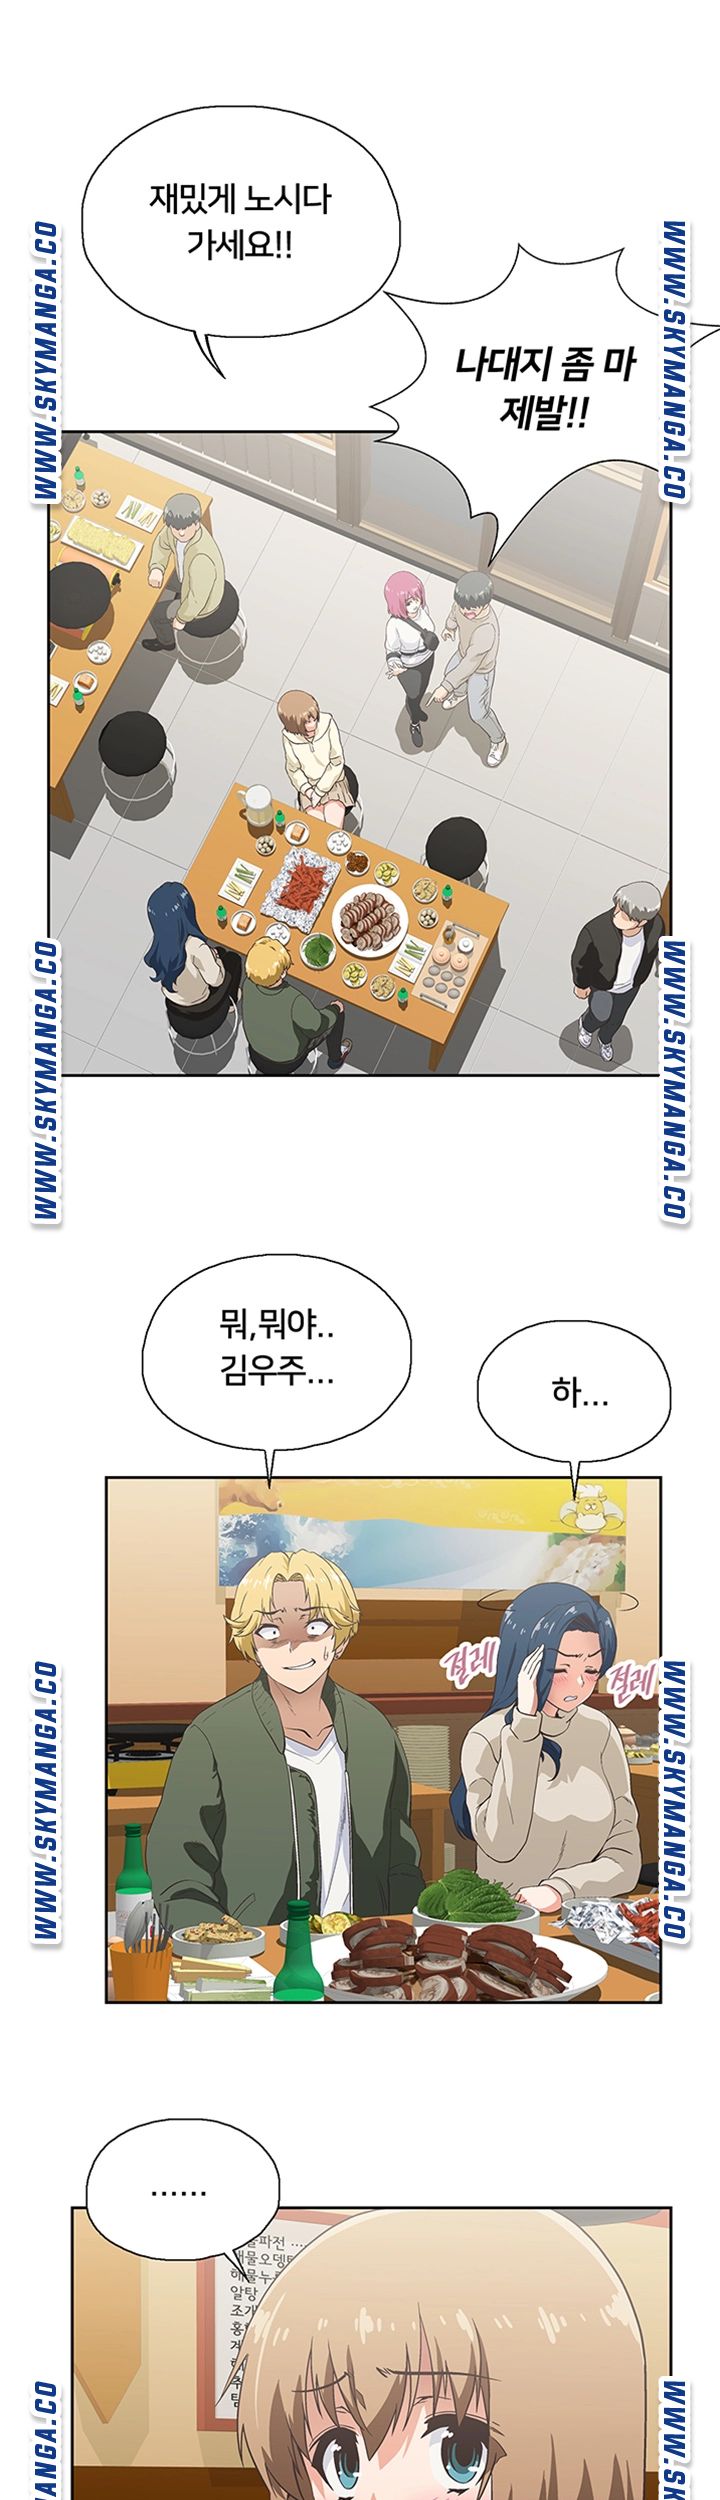 Fast Food Raw - Chapter 2 Page 64